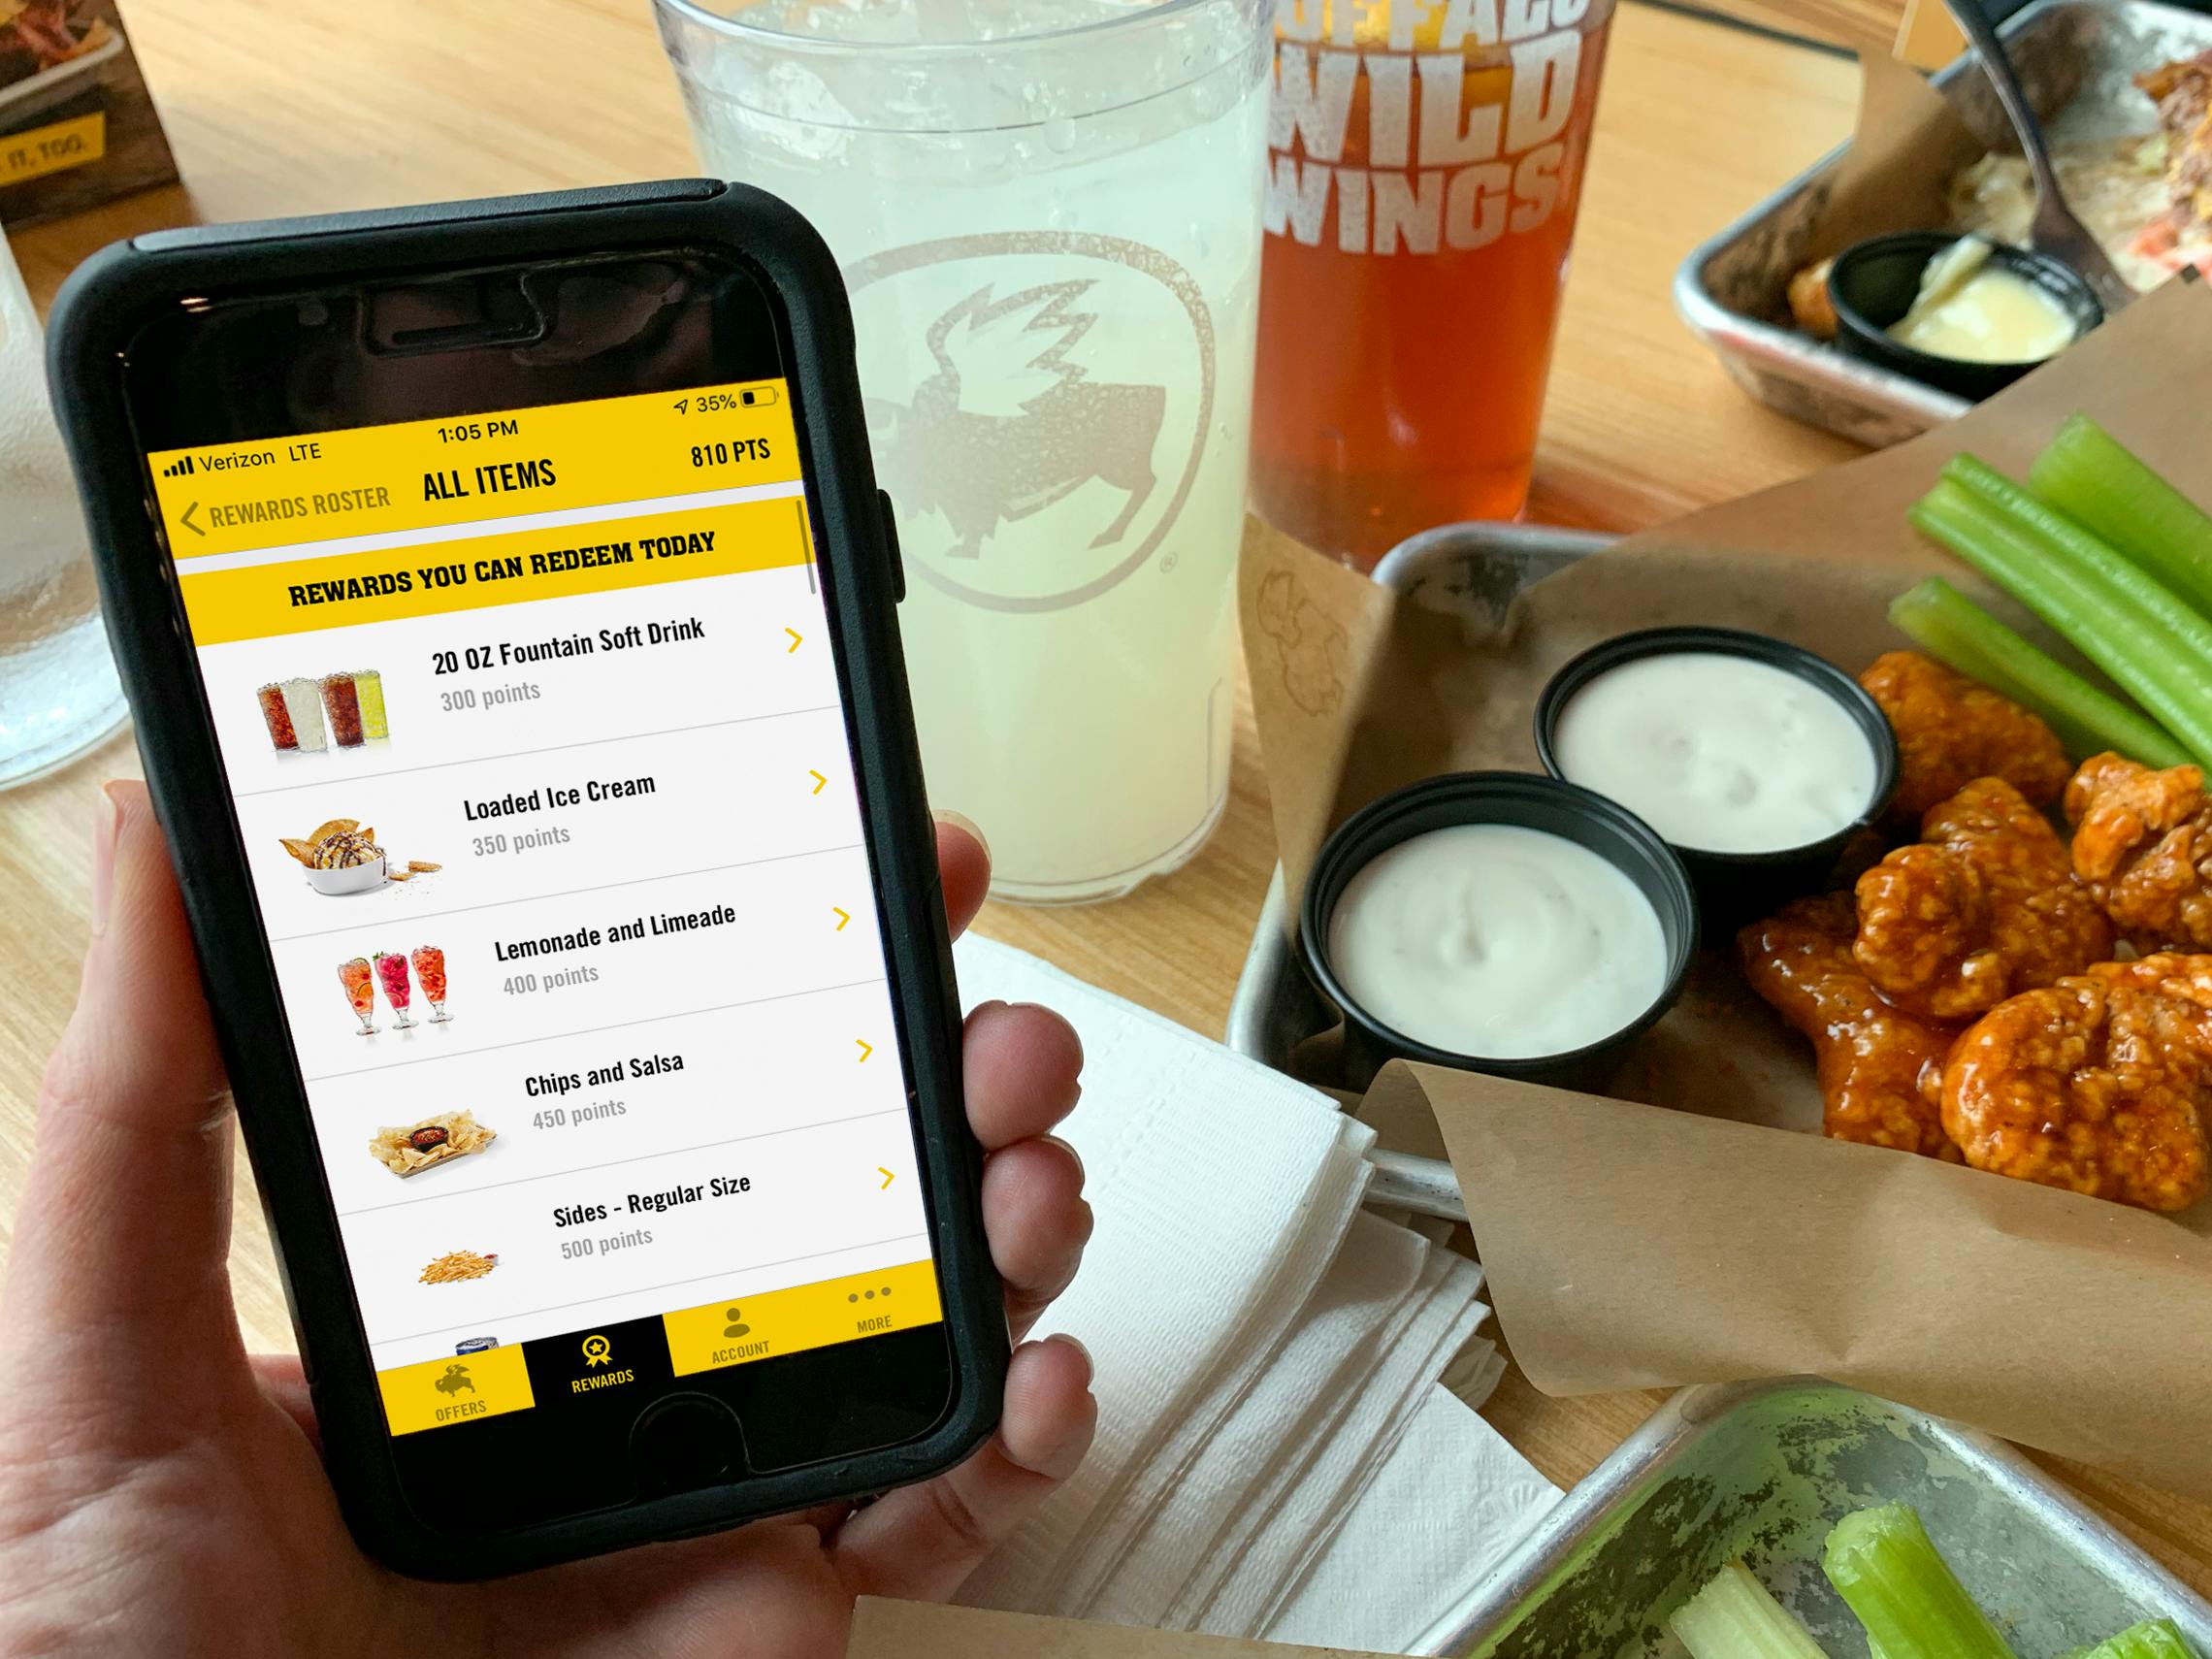 19 Red-Hot Buffalo Wild Wings Specials That'll Get You Free Wings - The Krazy Coupon Lady